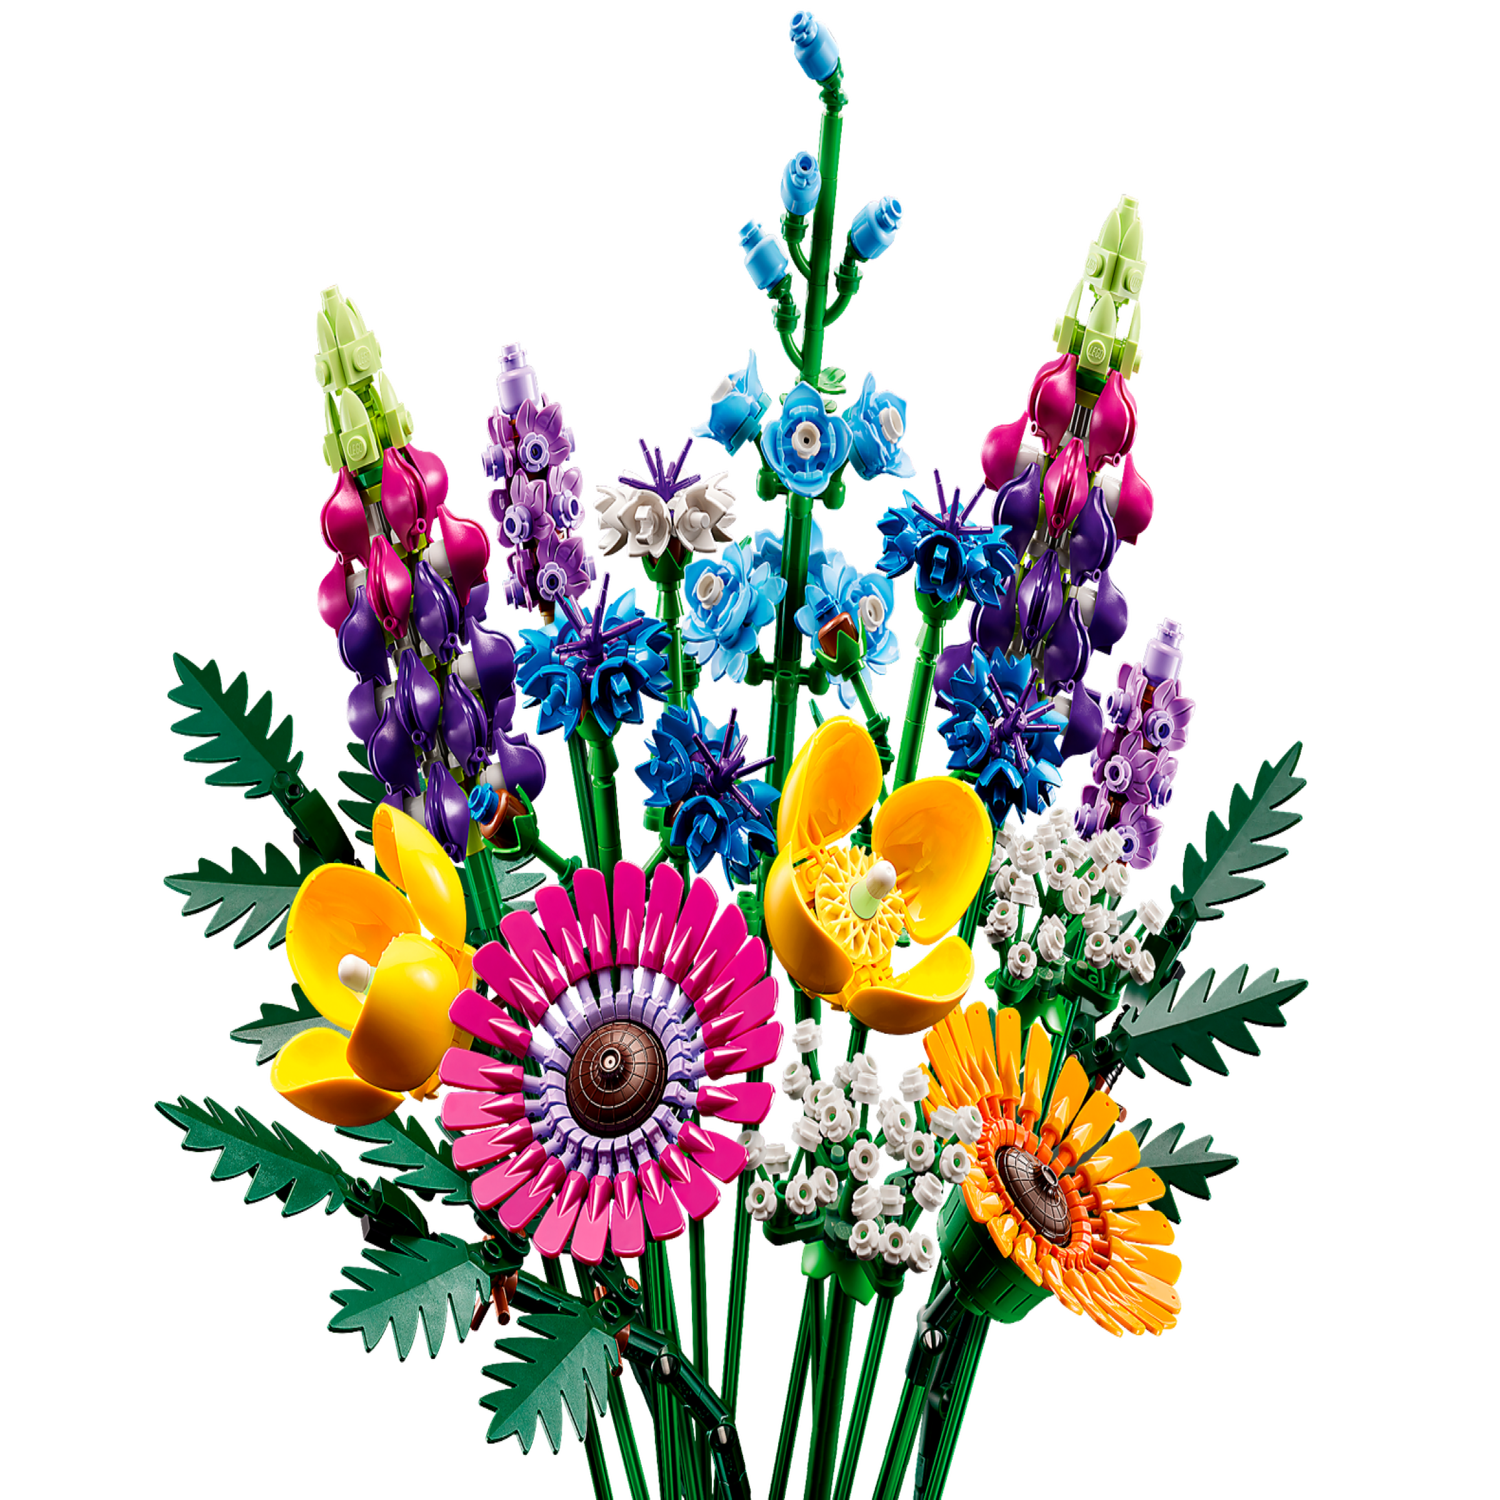 Wildflower Bouquet 10313  The Botanical Collection - LEGO